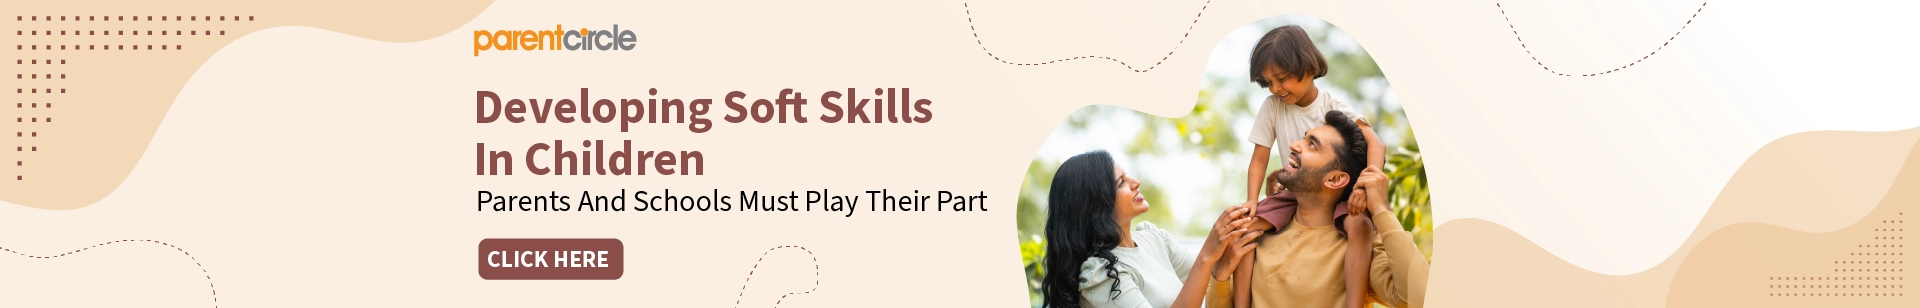 Developing Soft Skills In Children—Parents And Schools Must Play Their Part